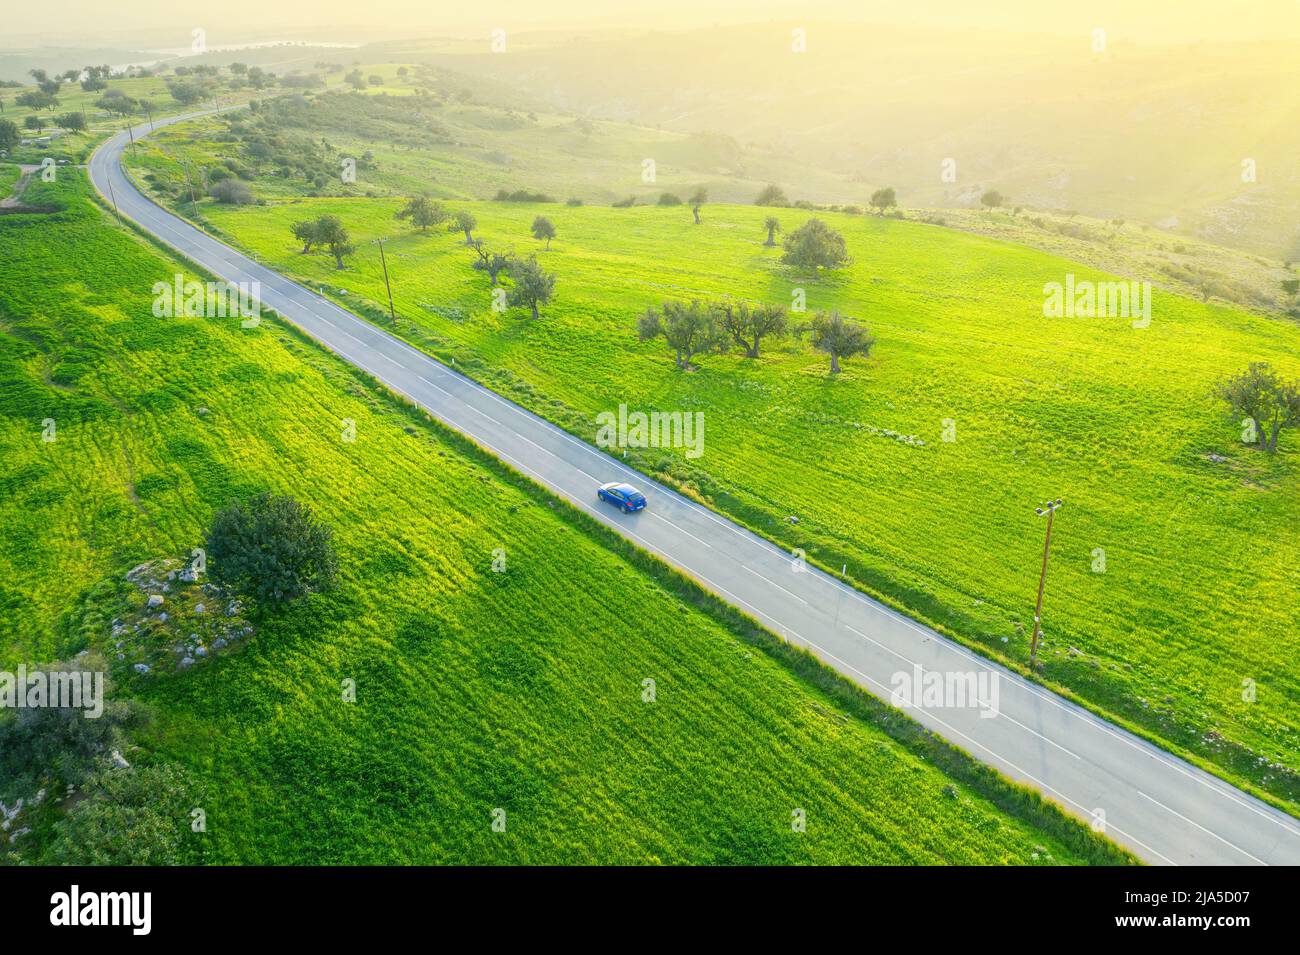 Countryside green landscape with a car driving down an asphalt road and a car, drone view from above Stock Photo